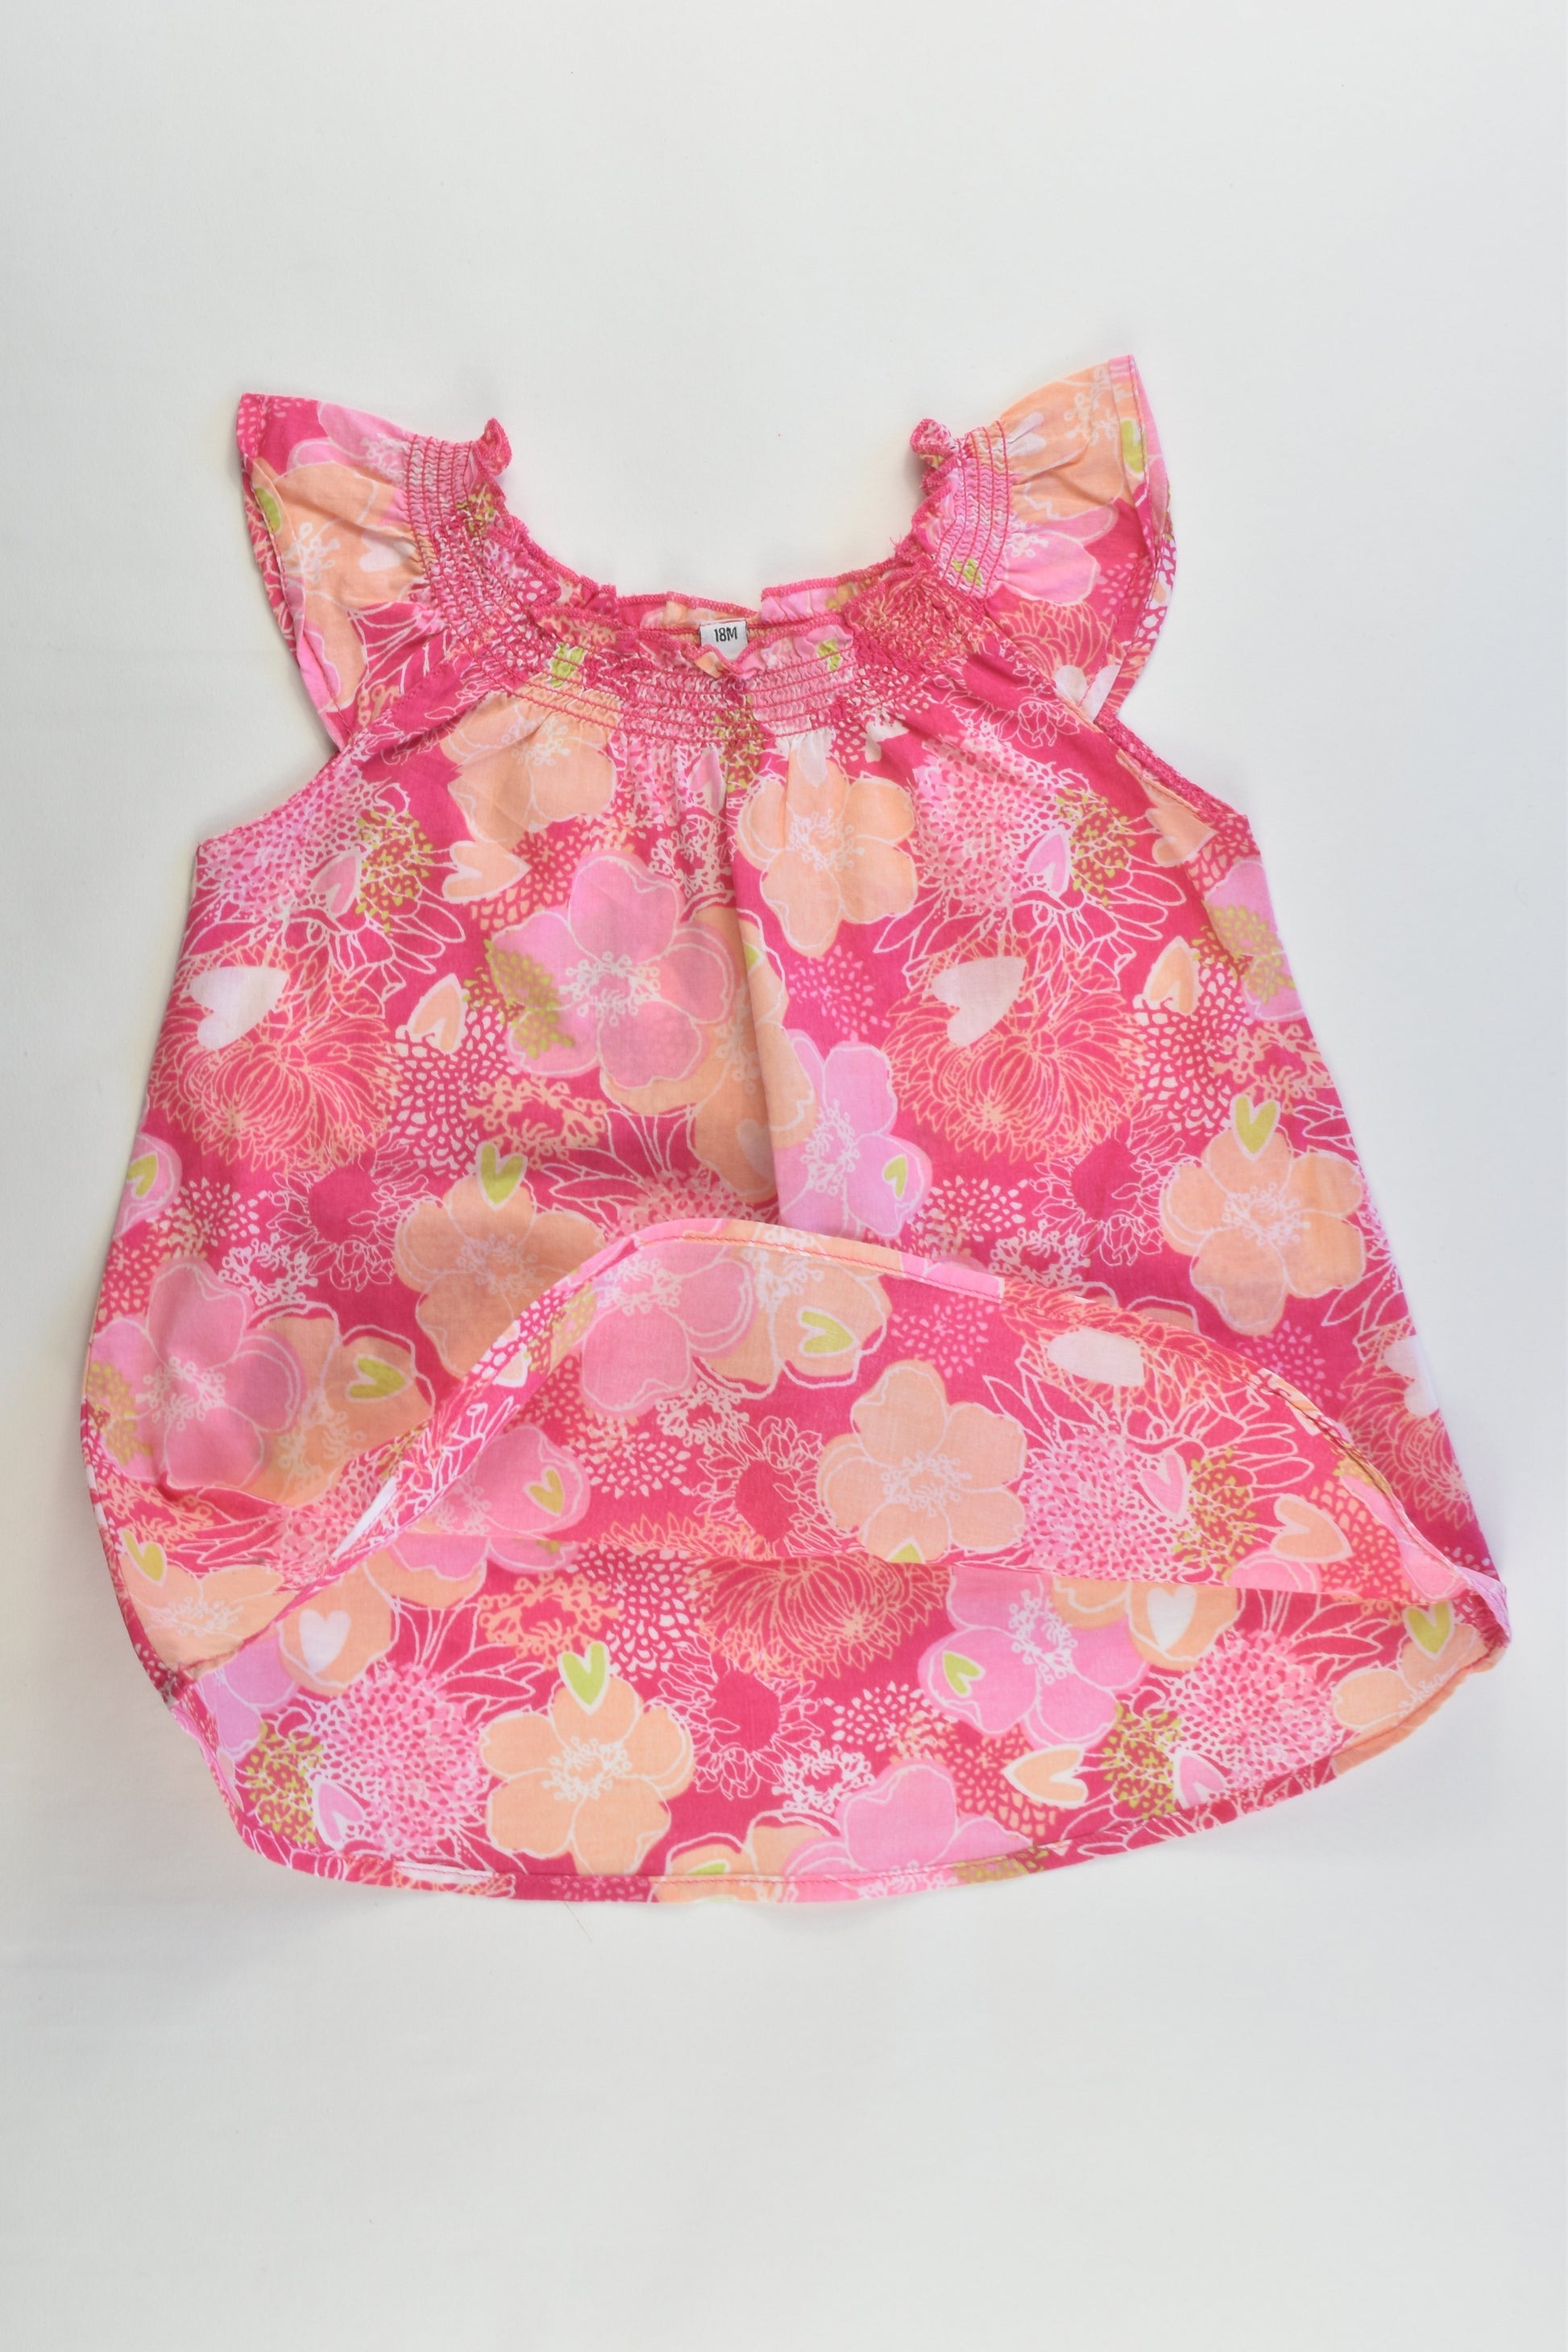 Brand Unknown Size 18 months Floral Blouse/Tunic